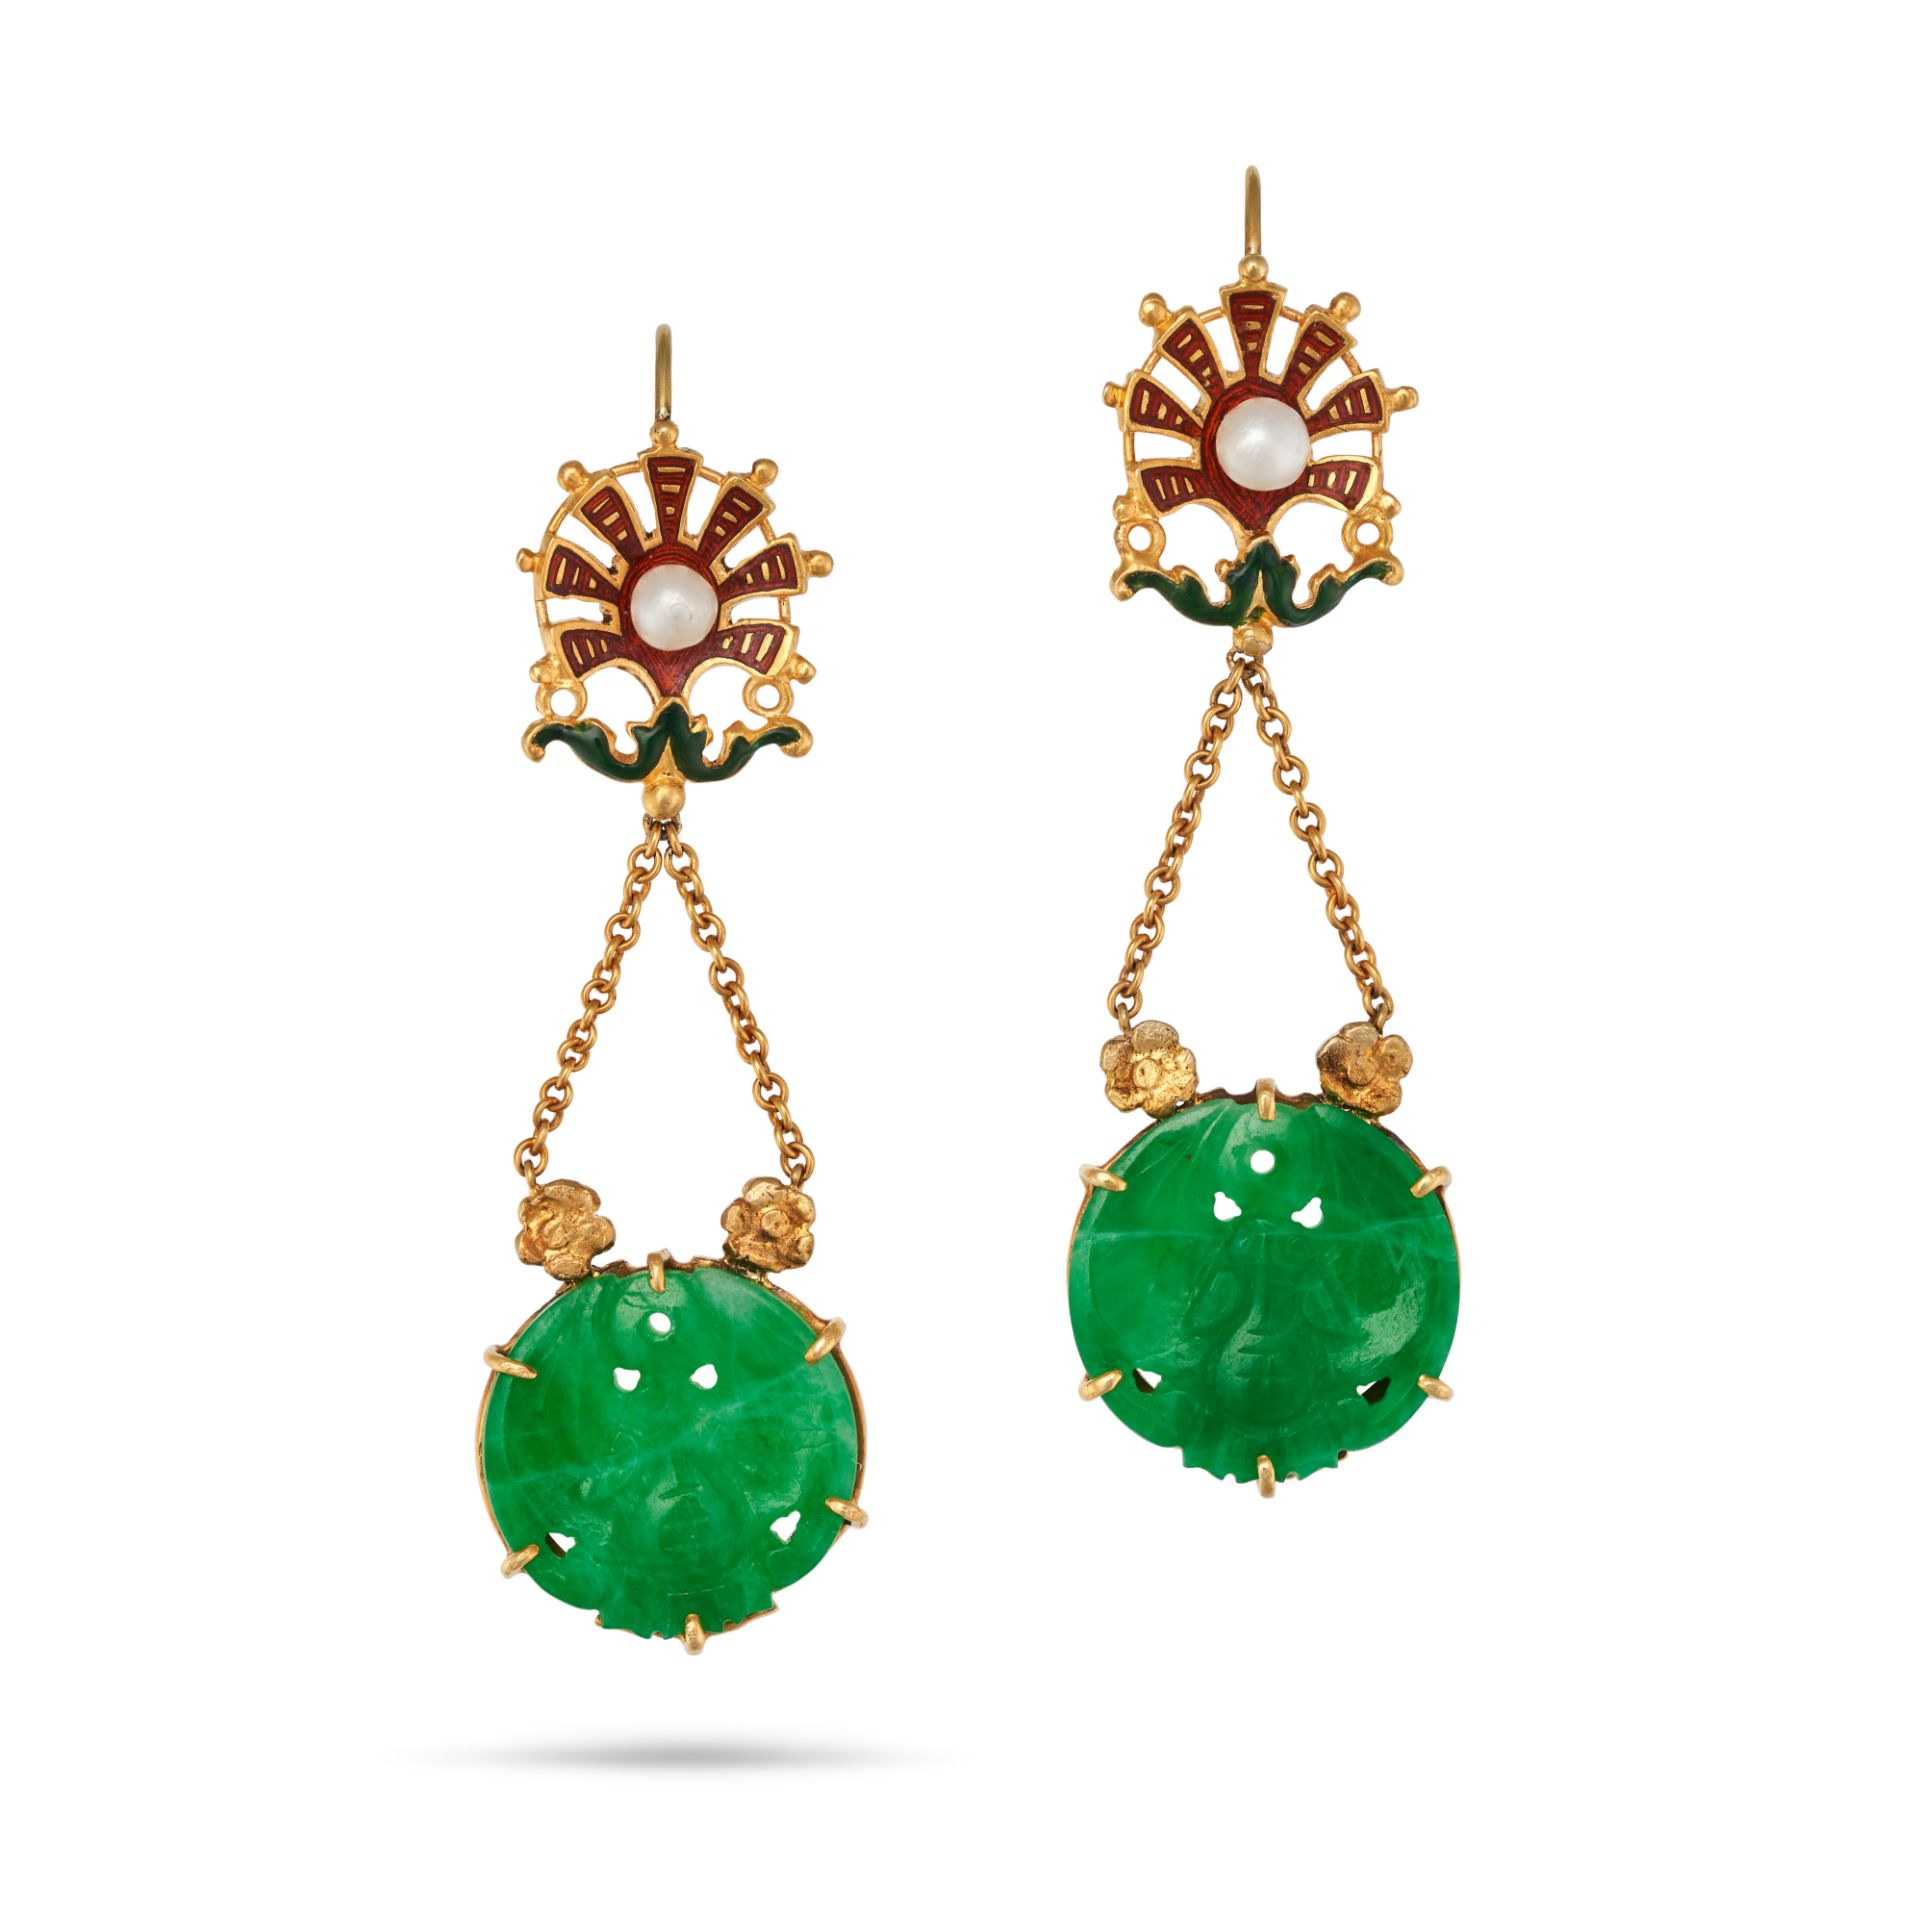 A PAIR OF JADEITE JADE, PEARL AND ENAMEL DROP EARRINGS in yellow gold, each earring designed as a...